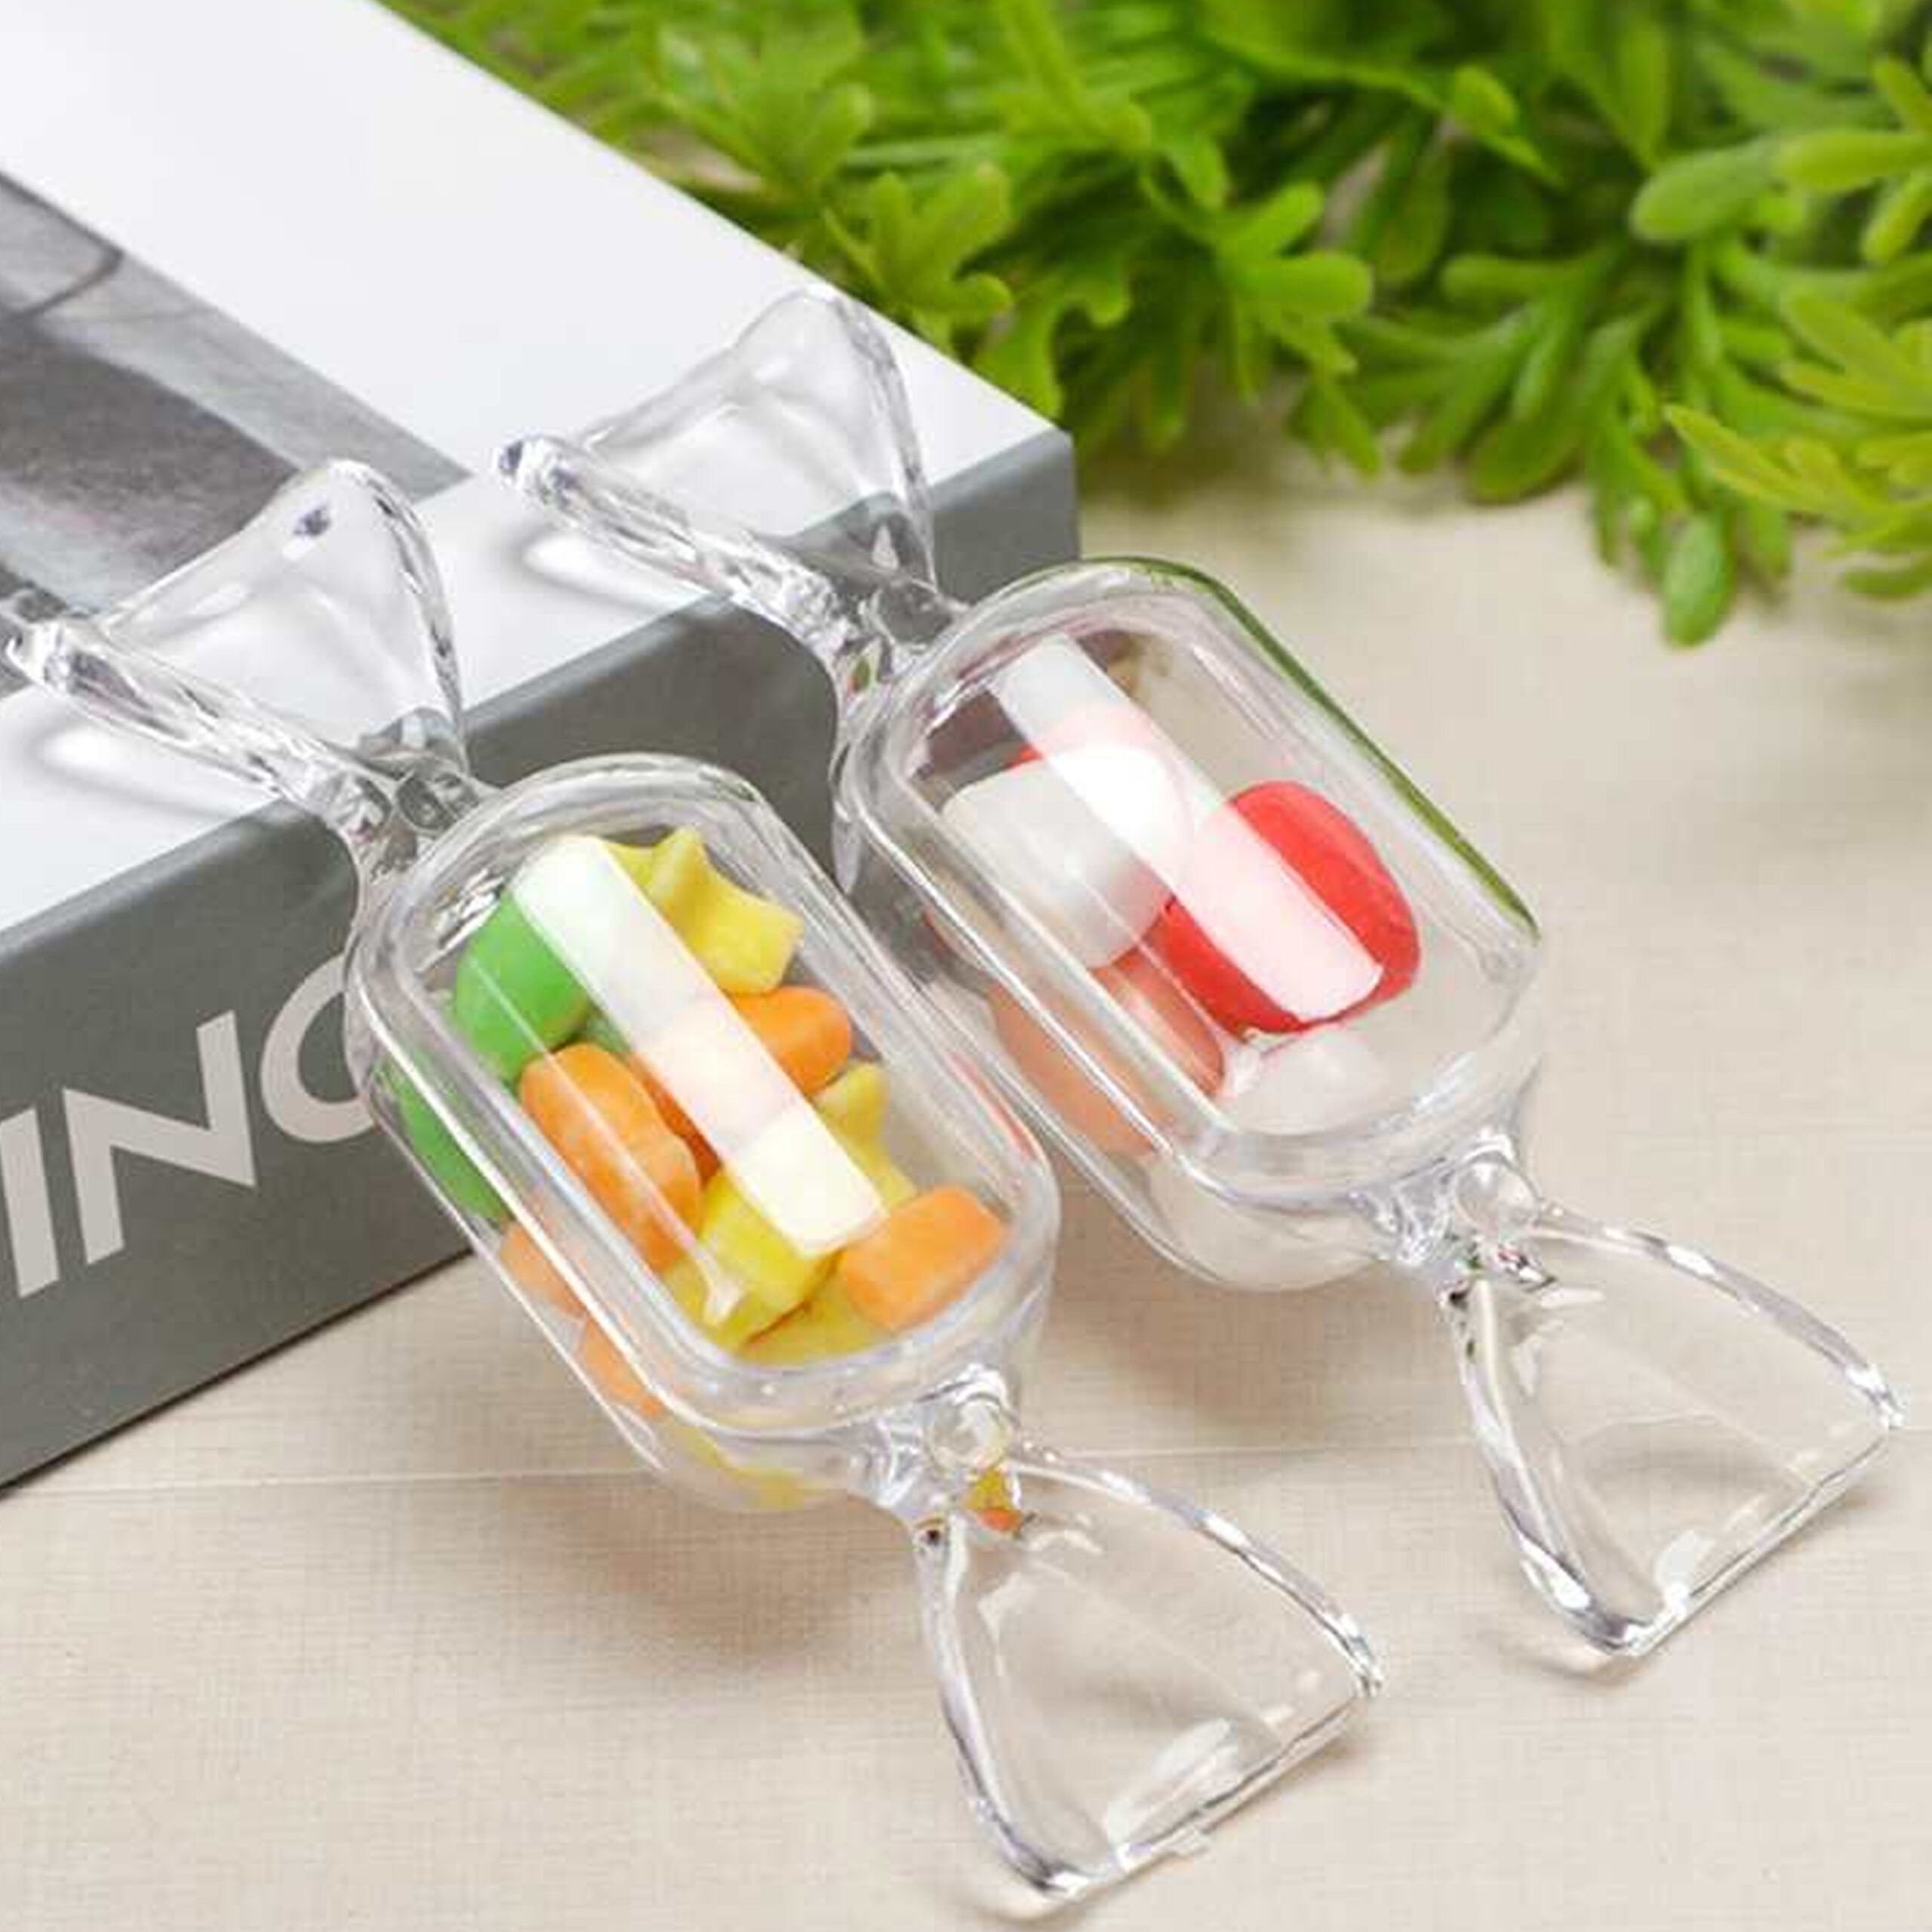 ACRYLIC SWEET
SHAPED
CONTAINERS
(1x10)